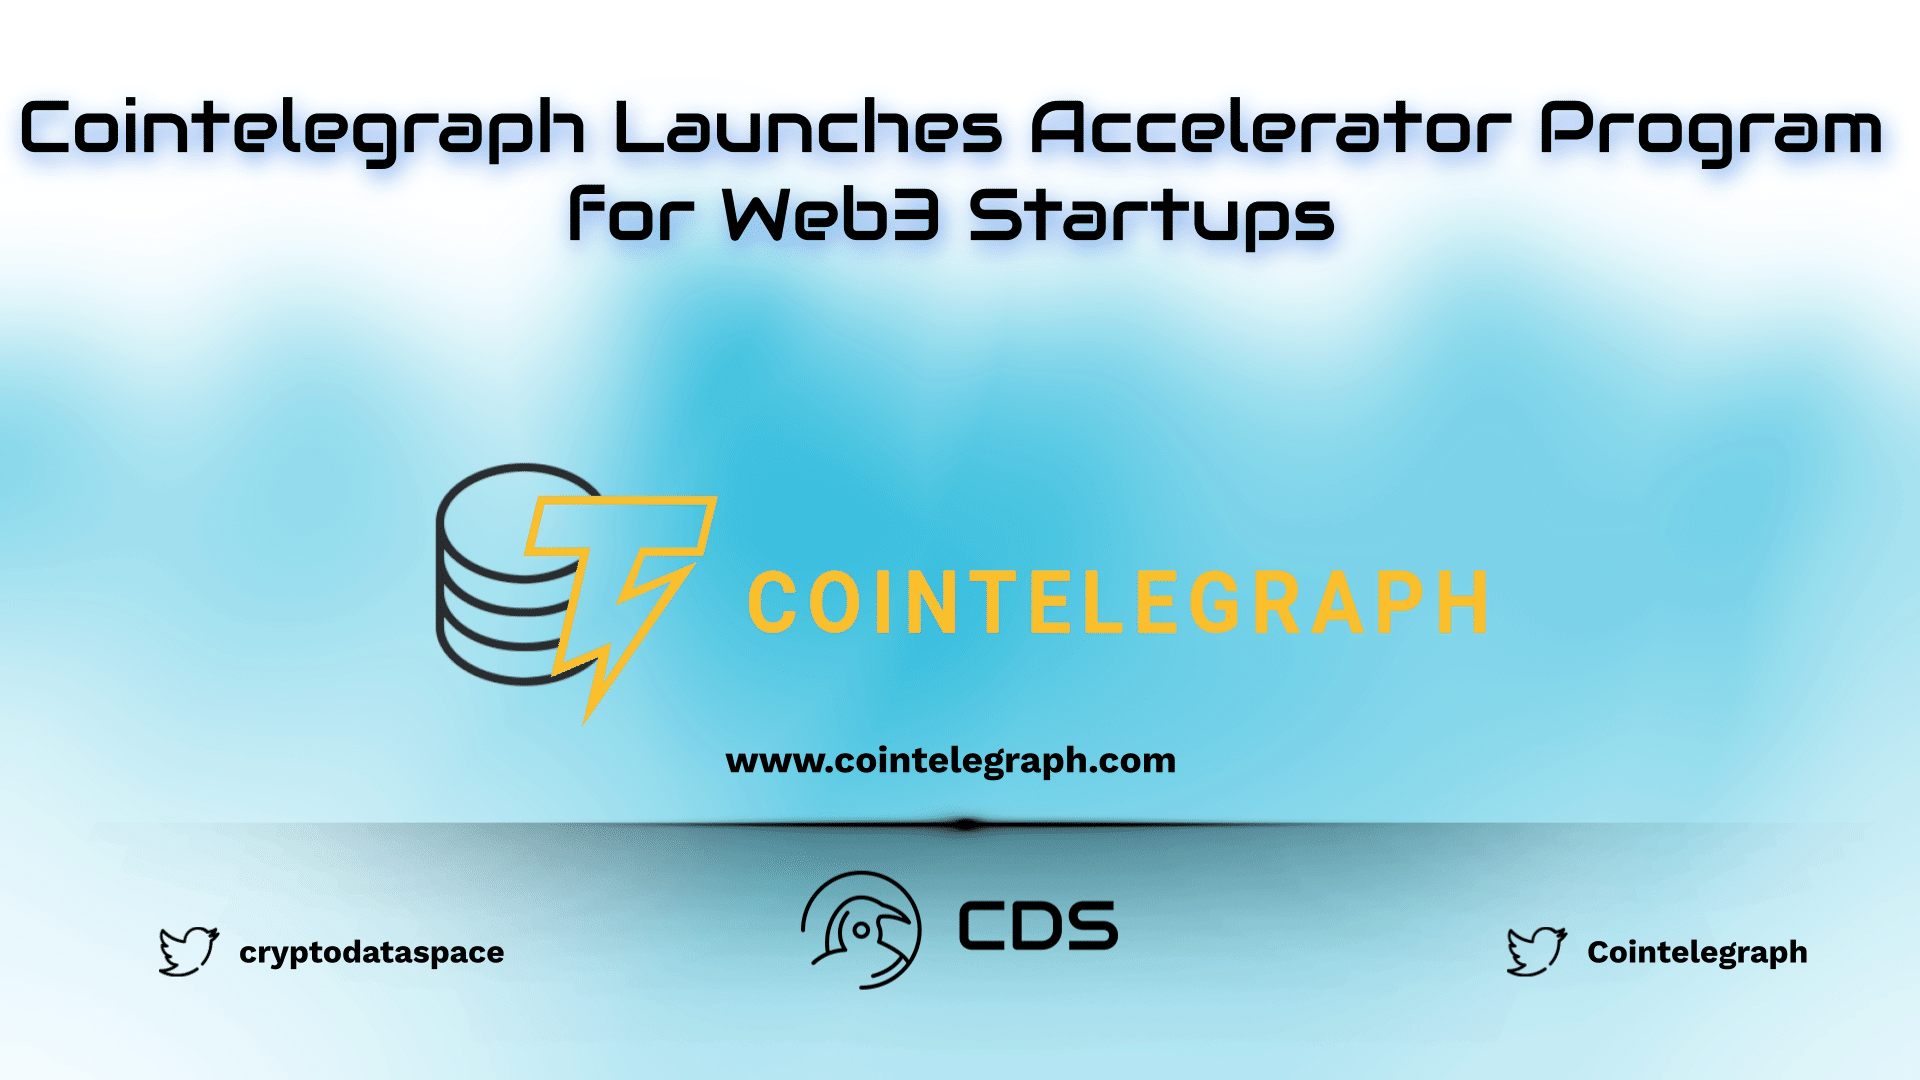 Cointelegraph Launches Accelerator Program for Web3 Startups